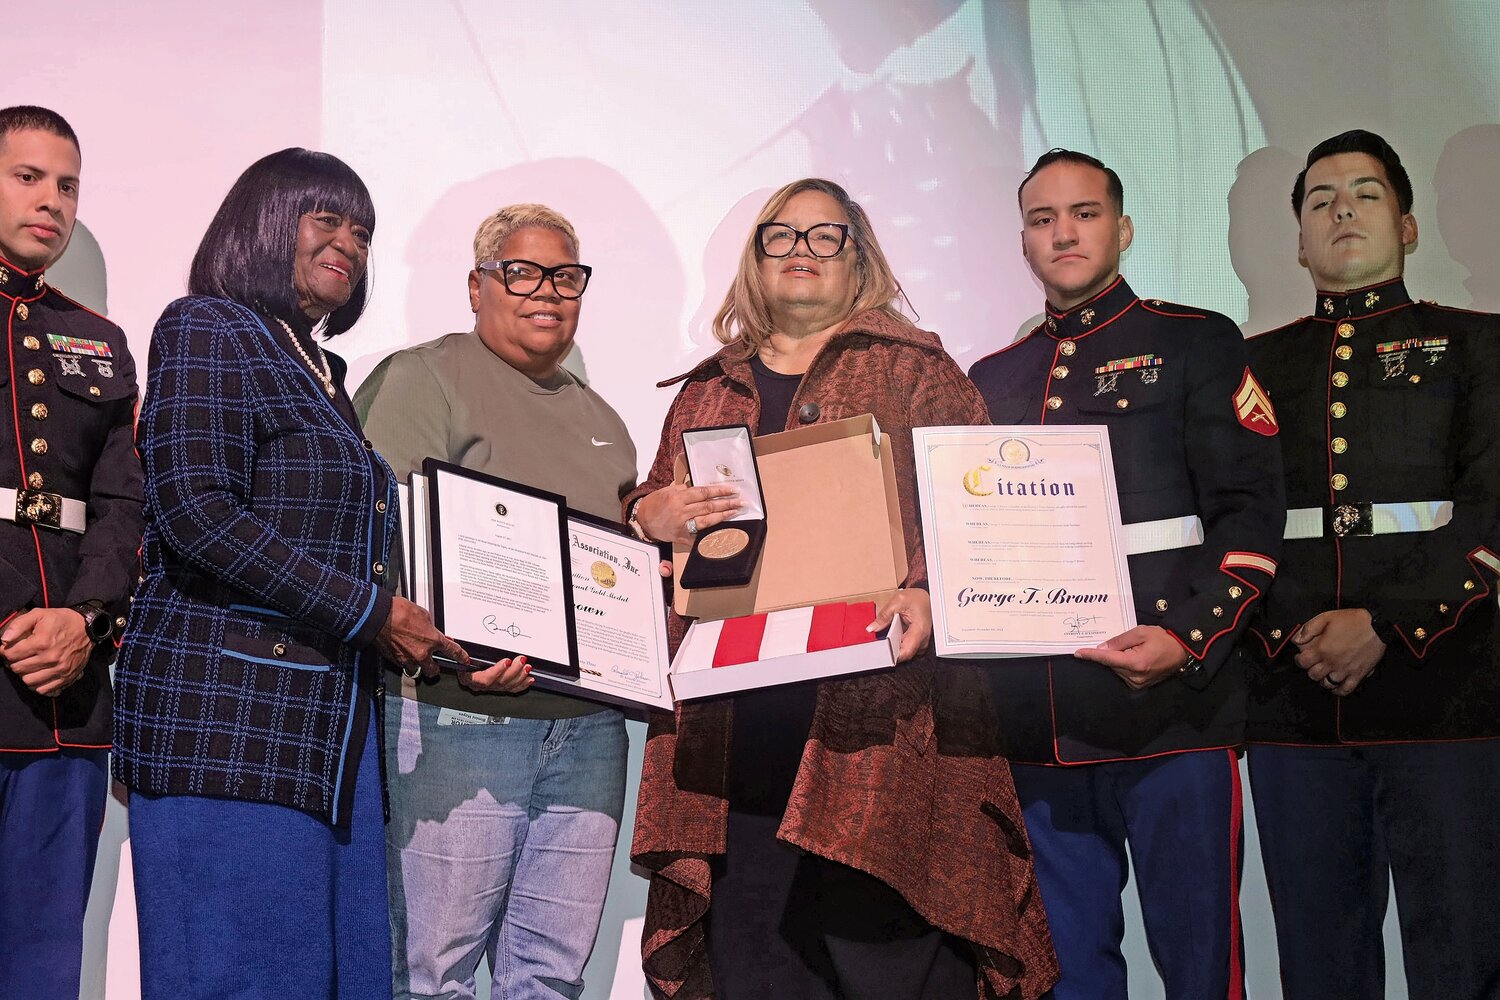 Flanked by active-duty Marines, Olga Brown-Young, fourth from left, and her sister Bimini Brown Hayes, third from left, displayed the honors their father, George T. Brown, received posthumously on Nov. 9 at Hempstead High School: the Congressional Medal of Honor; a framed version of the 2012 statement from President Barack Obama when he awarded the medal to the Montford Point Marines as a group; a U.S. flag sent from Congressman Anthony D’Esposito; and written citations from the National Montford Point Marine Association, Inc., State Senator Kevin Thomas, County Executive Bruce Blakeman, and Deputy Town Executive Dorothy Goosby, who stands second from left in the photo.